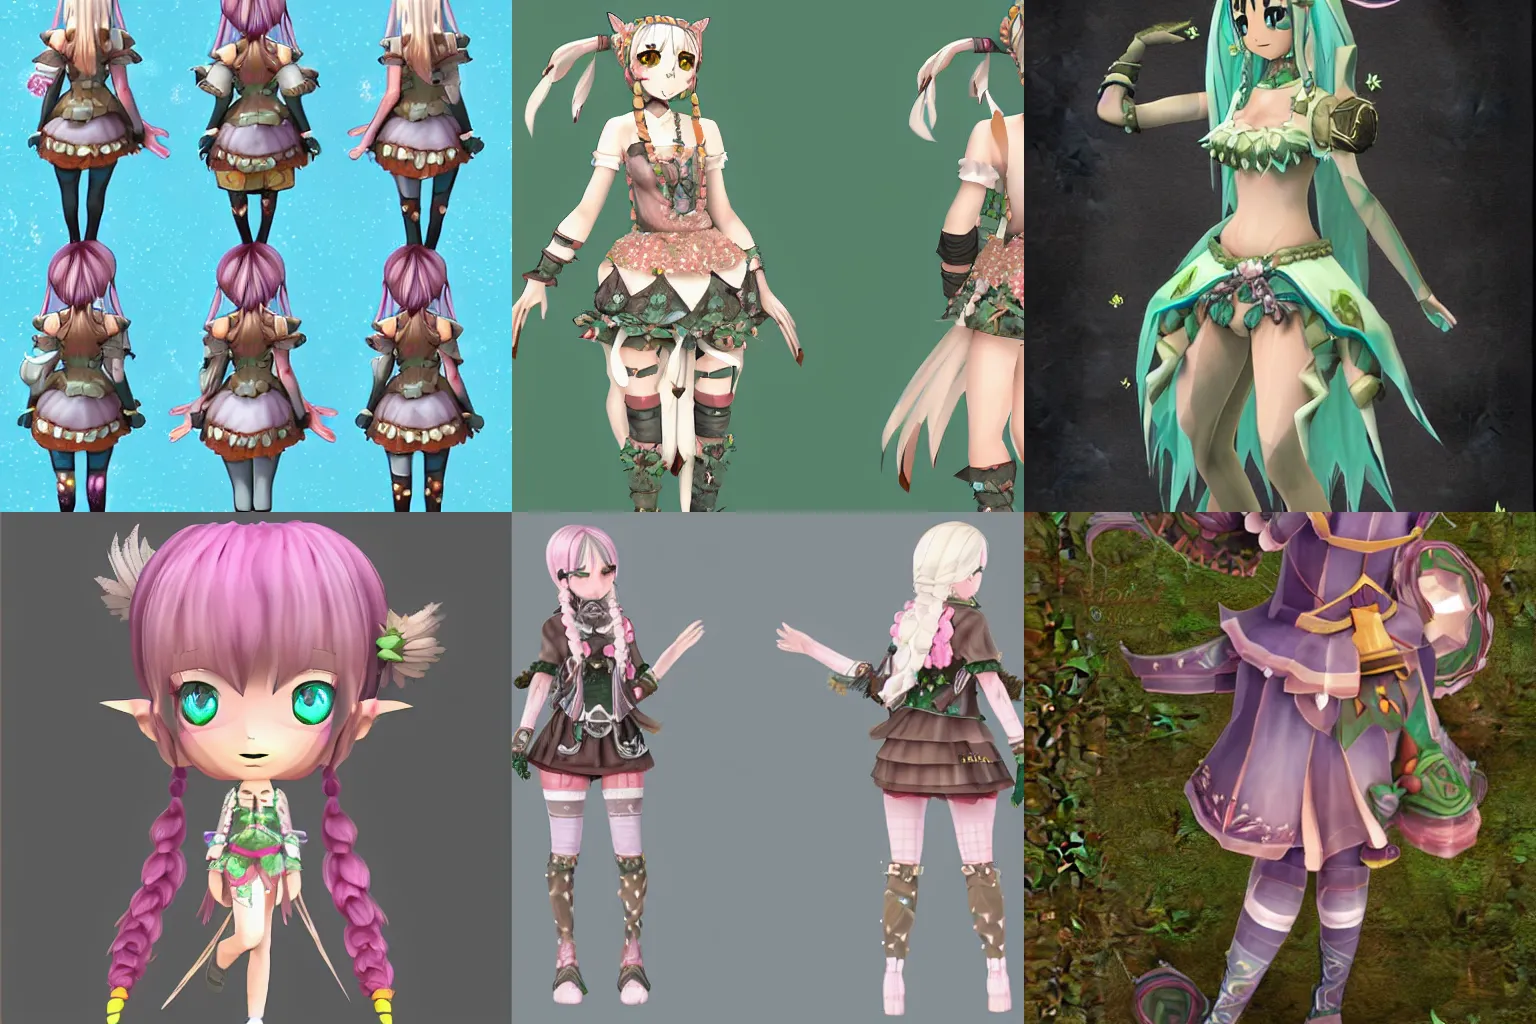 Prompt: 3d character, art style of Rune Factory 5, female, views of front back, side, hand painted textures, full body adoptable, low poly, pigtails, intricate details, fantasy, nature goddess moon and glitter themes